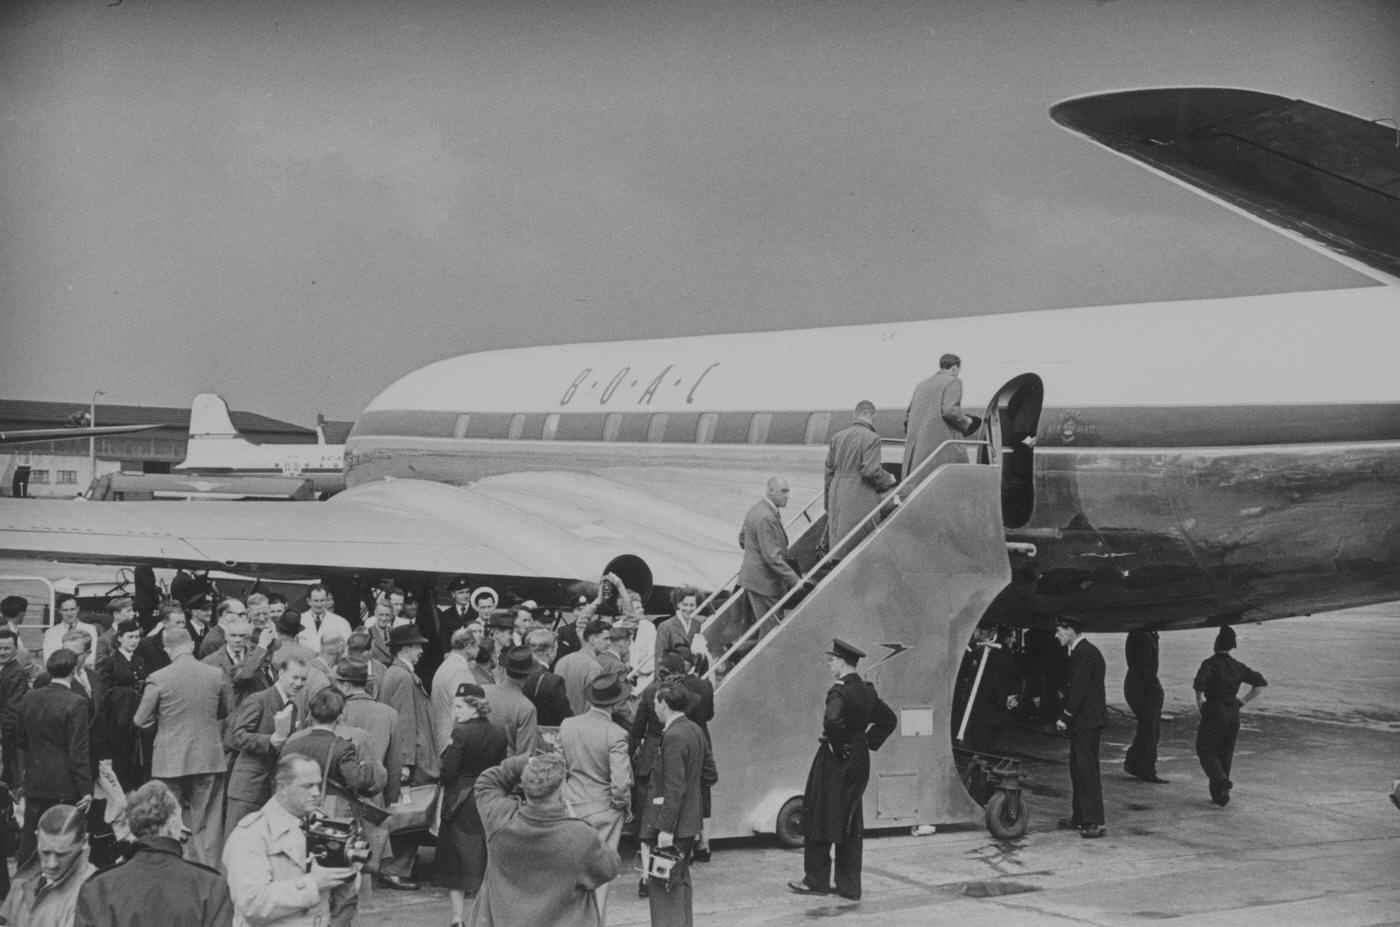 The first British Comet jet passenger service from London Airport to Johannesburg is shown in this photo from 1952.